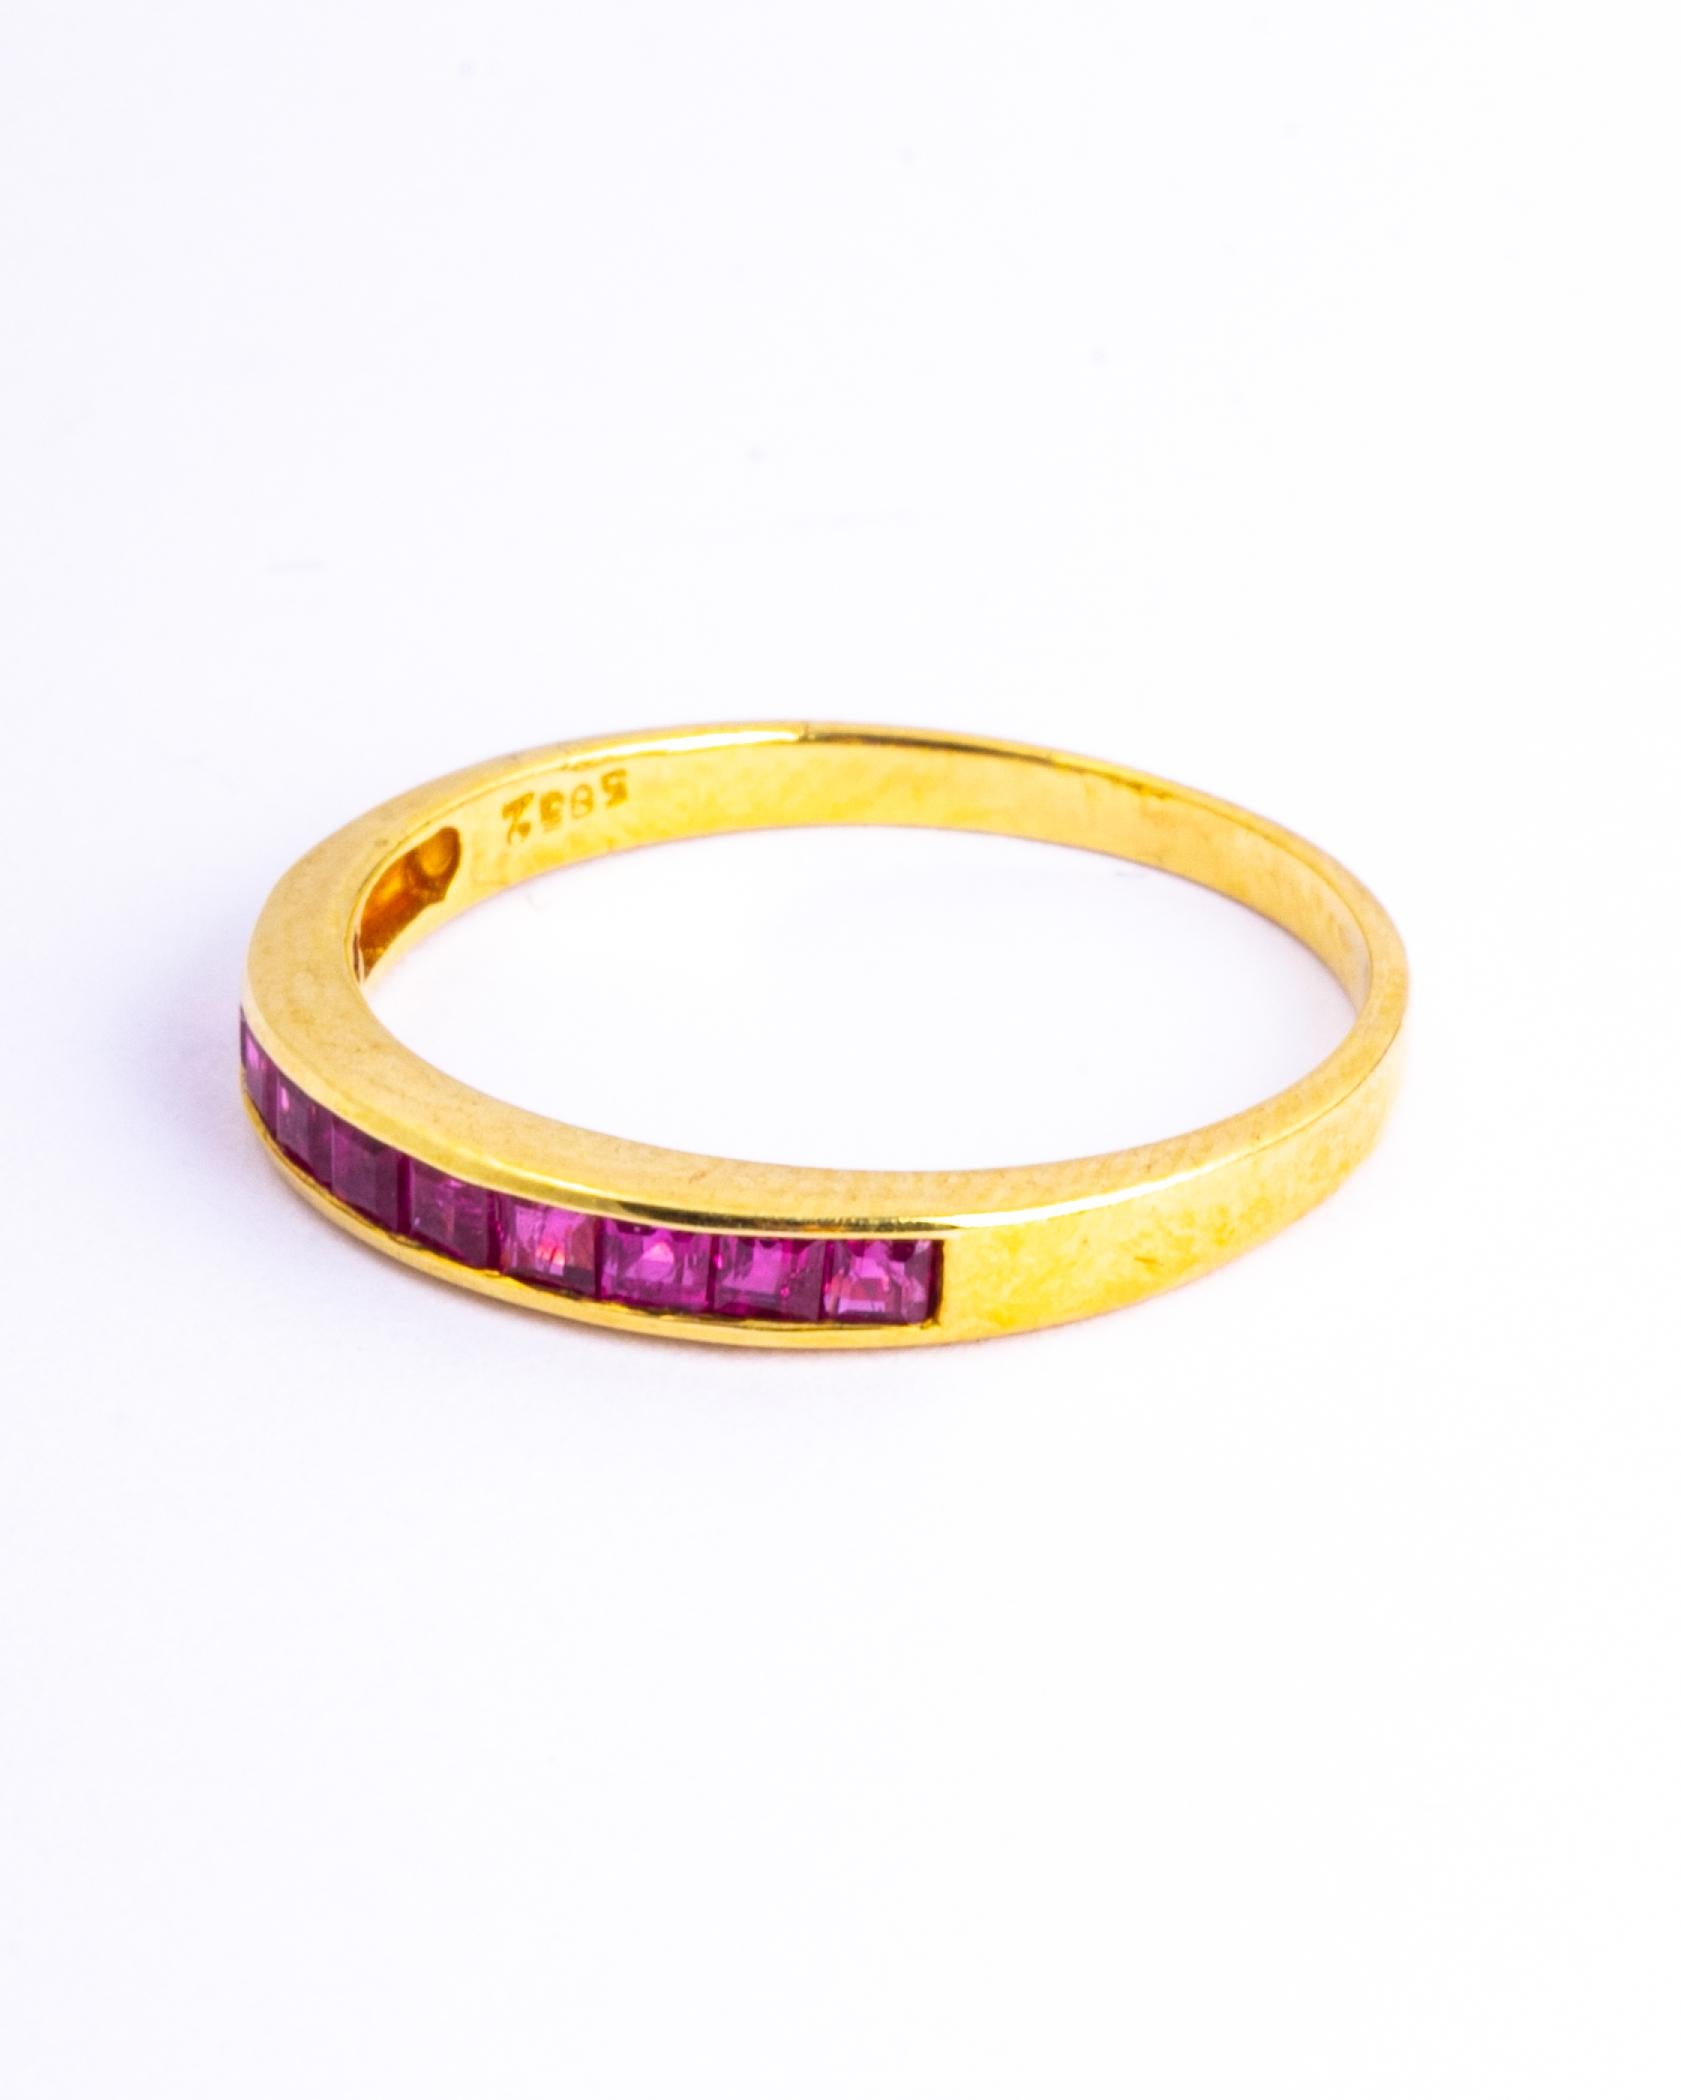 The rubies set within this 9ct gold band are square cut and total approx 50pts. They have a great shine to them and are beautifully bright stones. 

Ring Size: M or 6 1/4 
Band Width: 2.5mm 

Weight: 1.54g